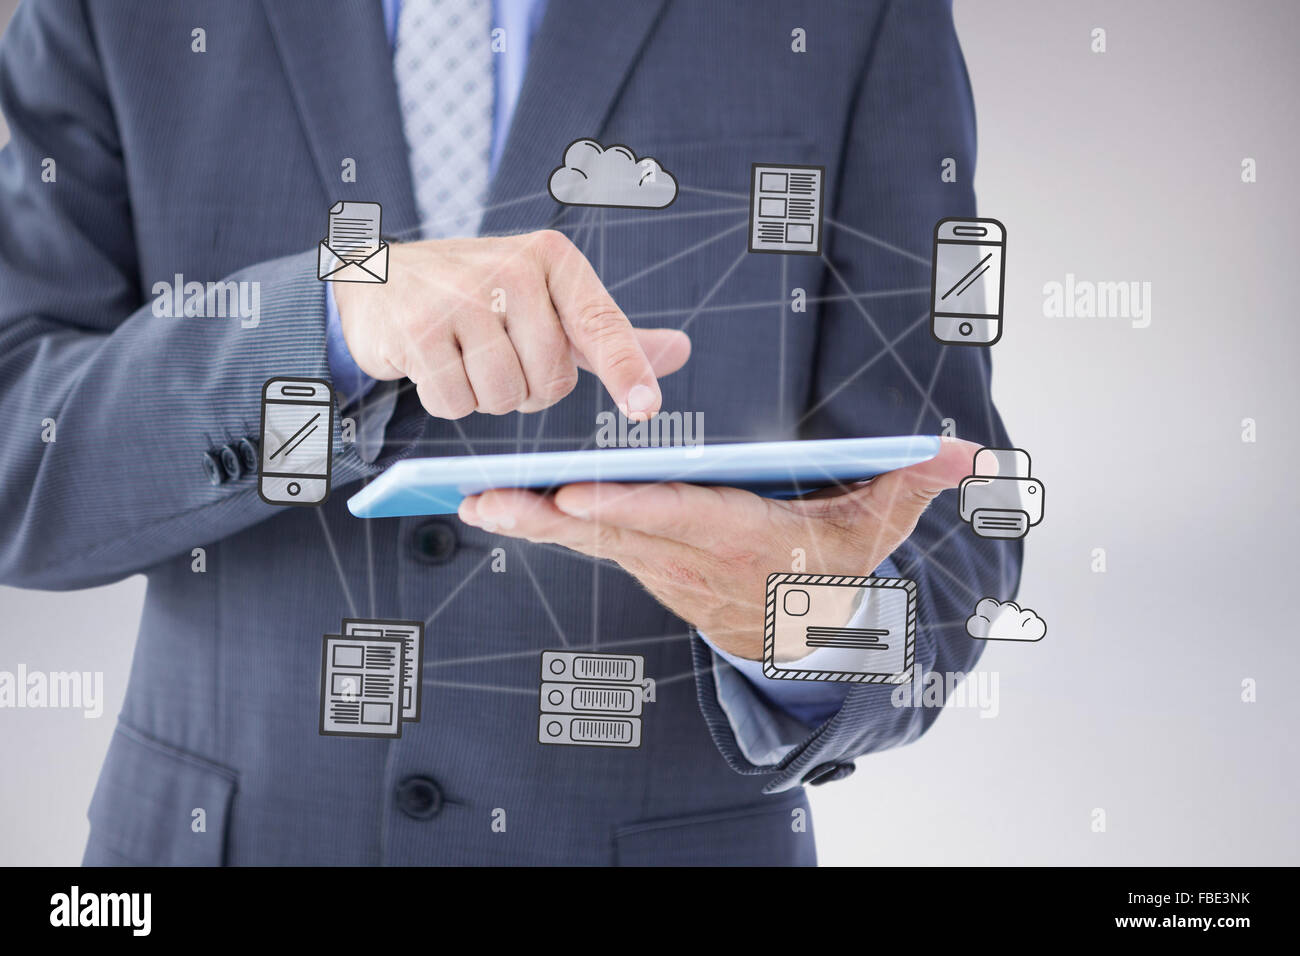 Composite image of businessman using tablet pc Stock Photo